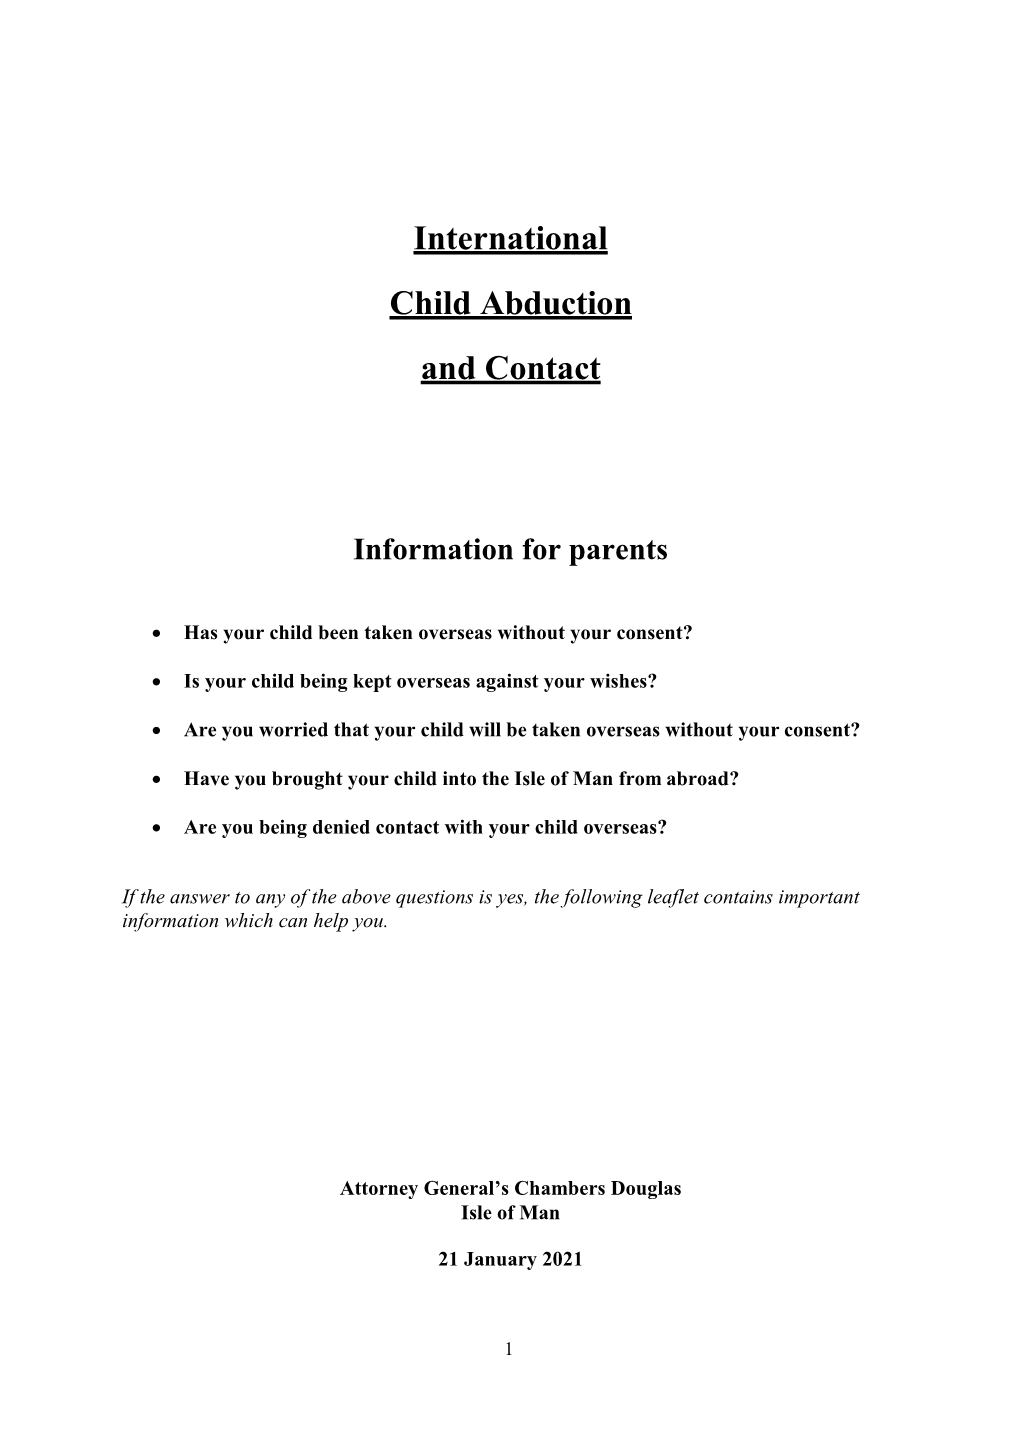 International Child Abduction and Contact